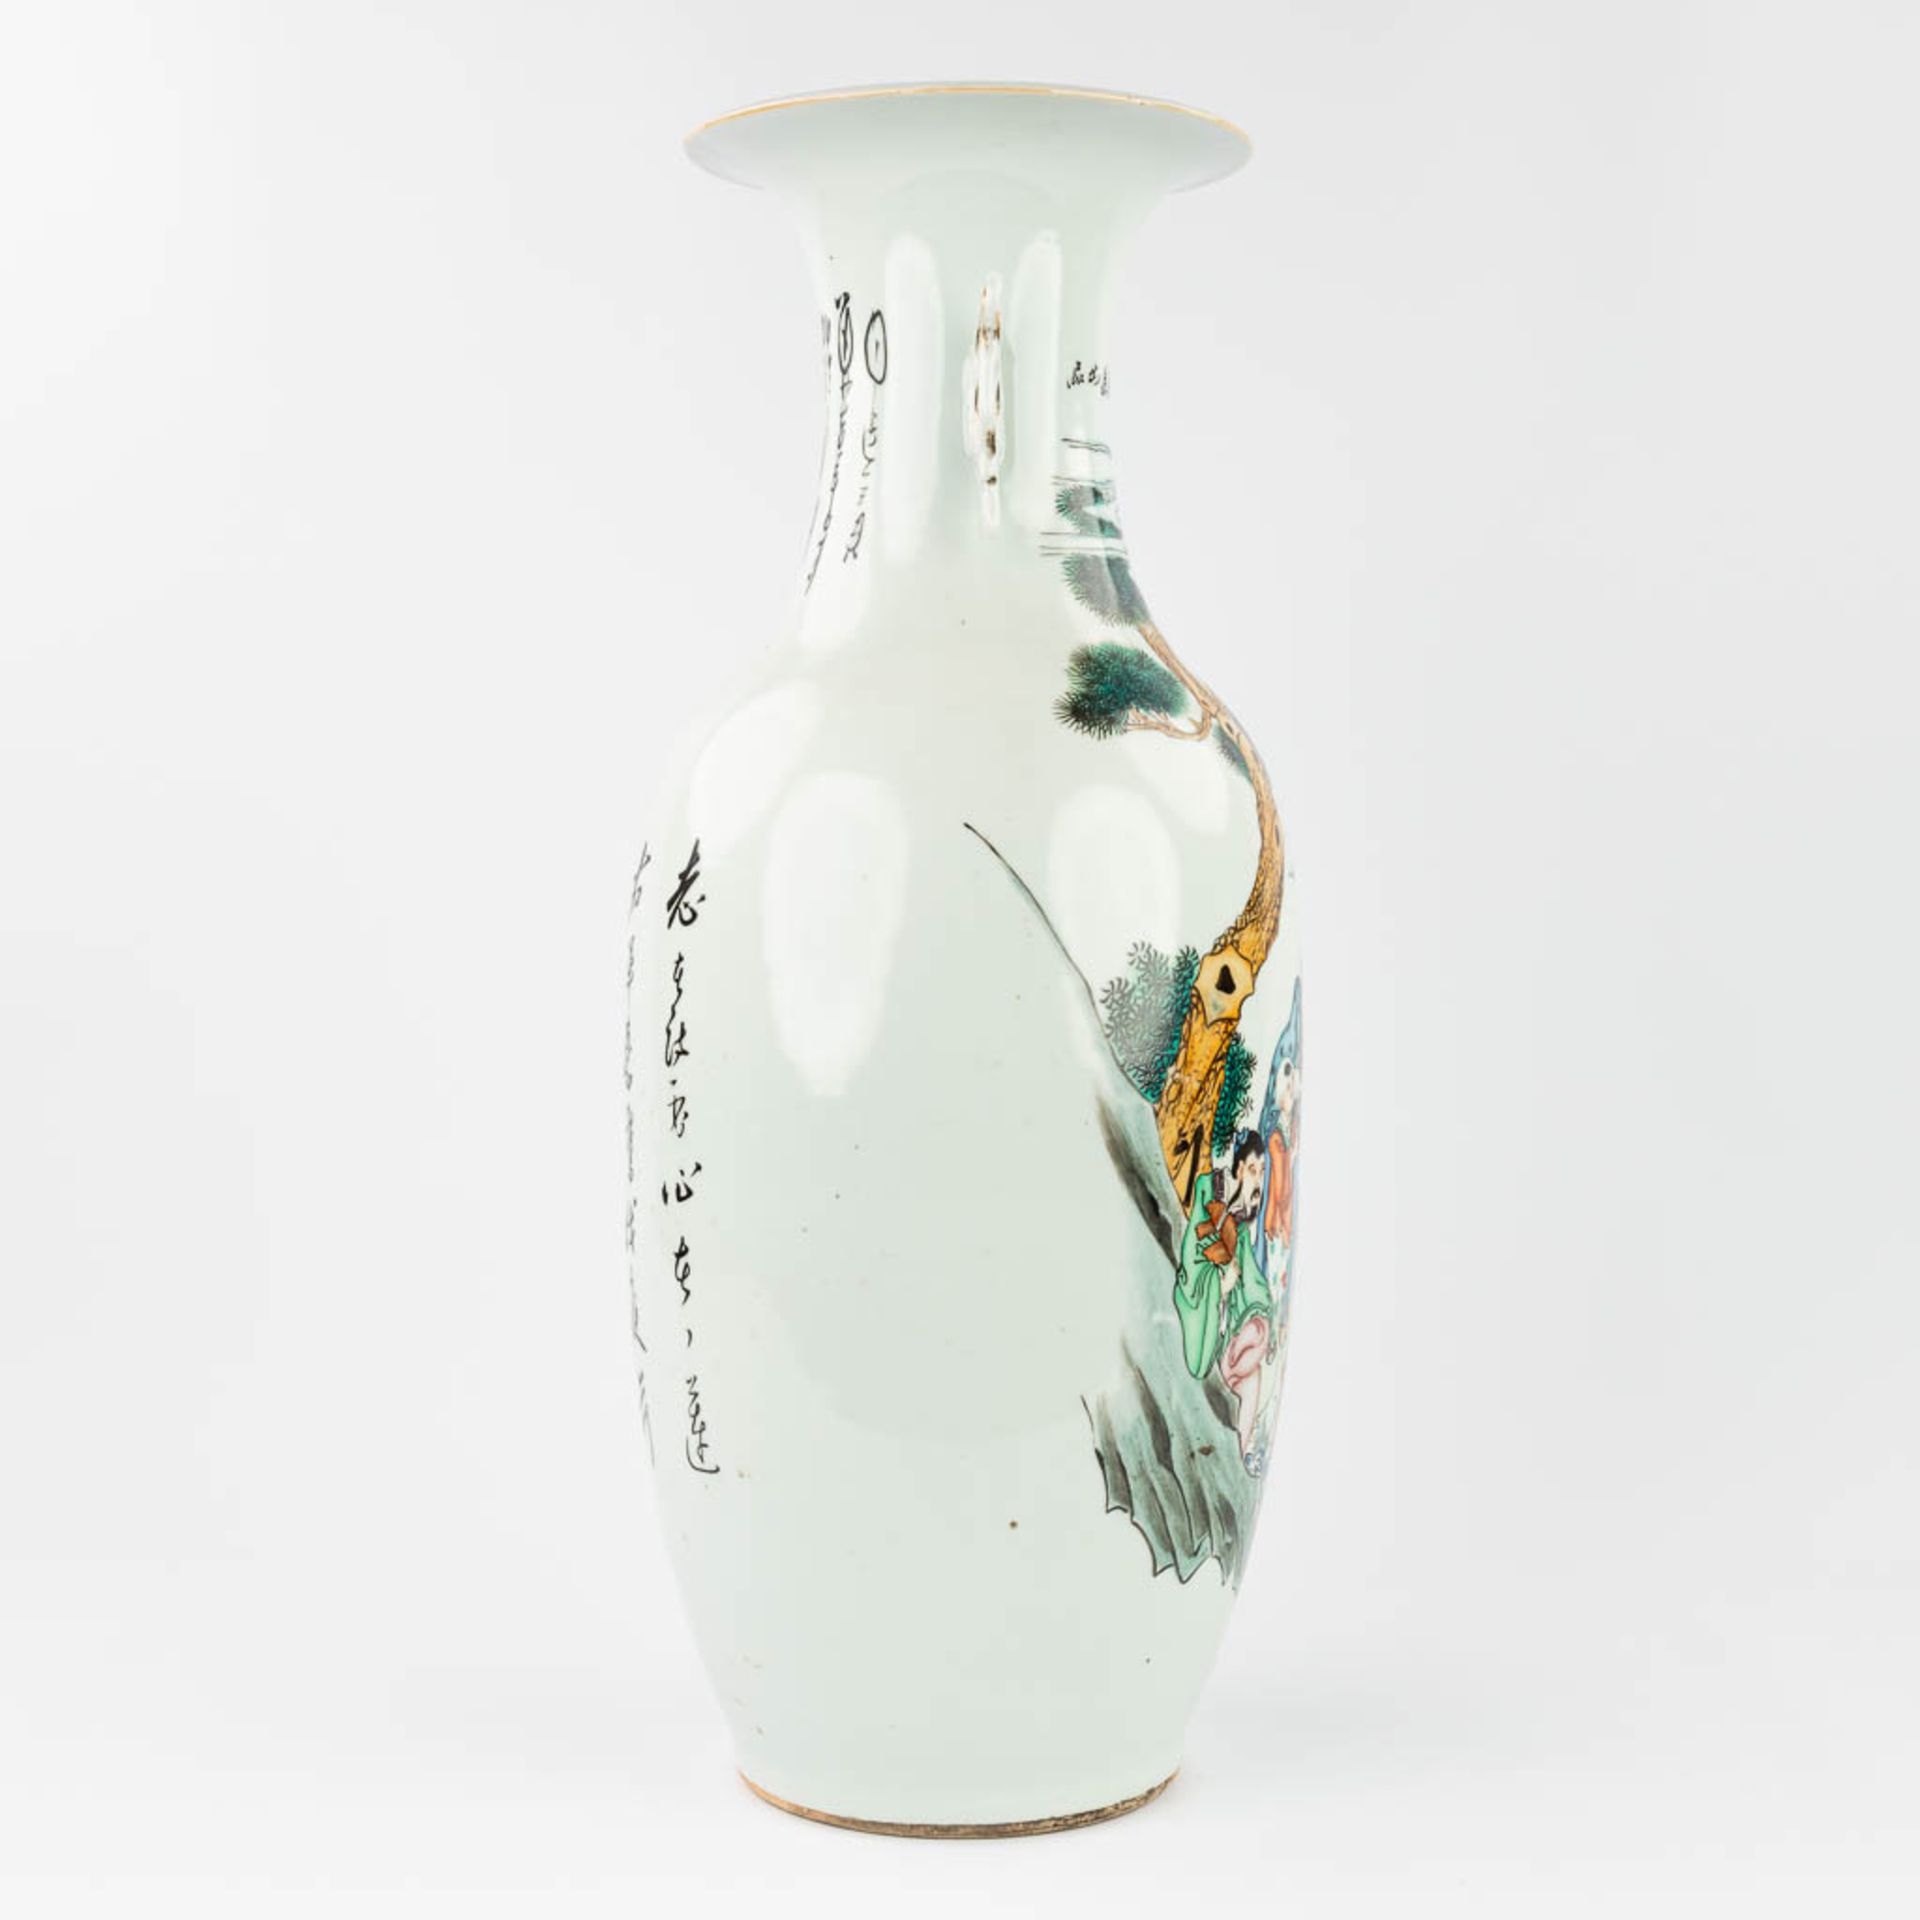 A Chinese vase made of porcelain and decorated with wise men in the garden. (59 x 23 cm) - Image 8 of 14